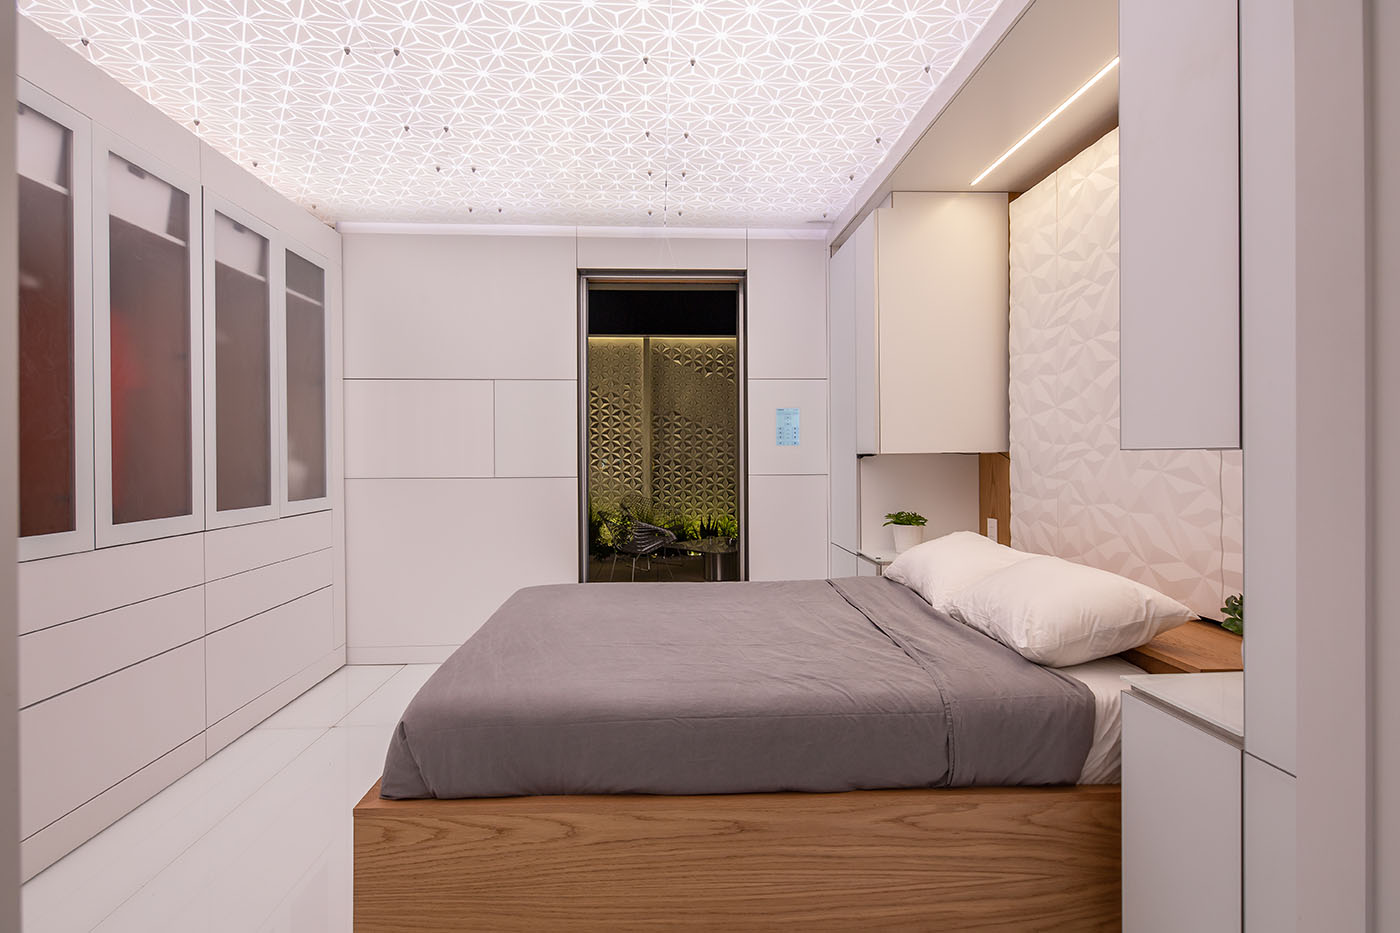 FutureHAUS bedroom with a smart bed that measures the sleep quality and adjusts the firmness, temperature, and elevation.